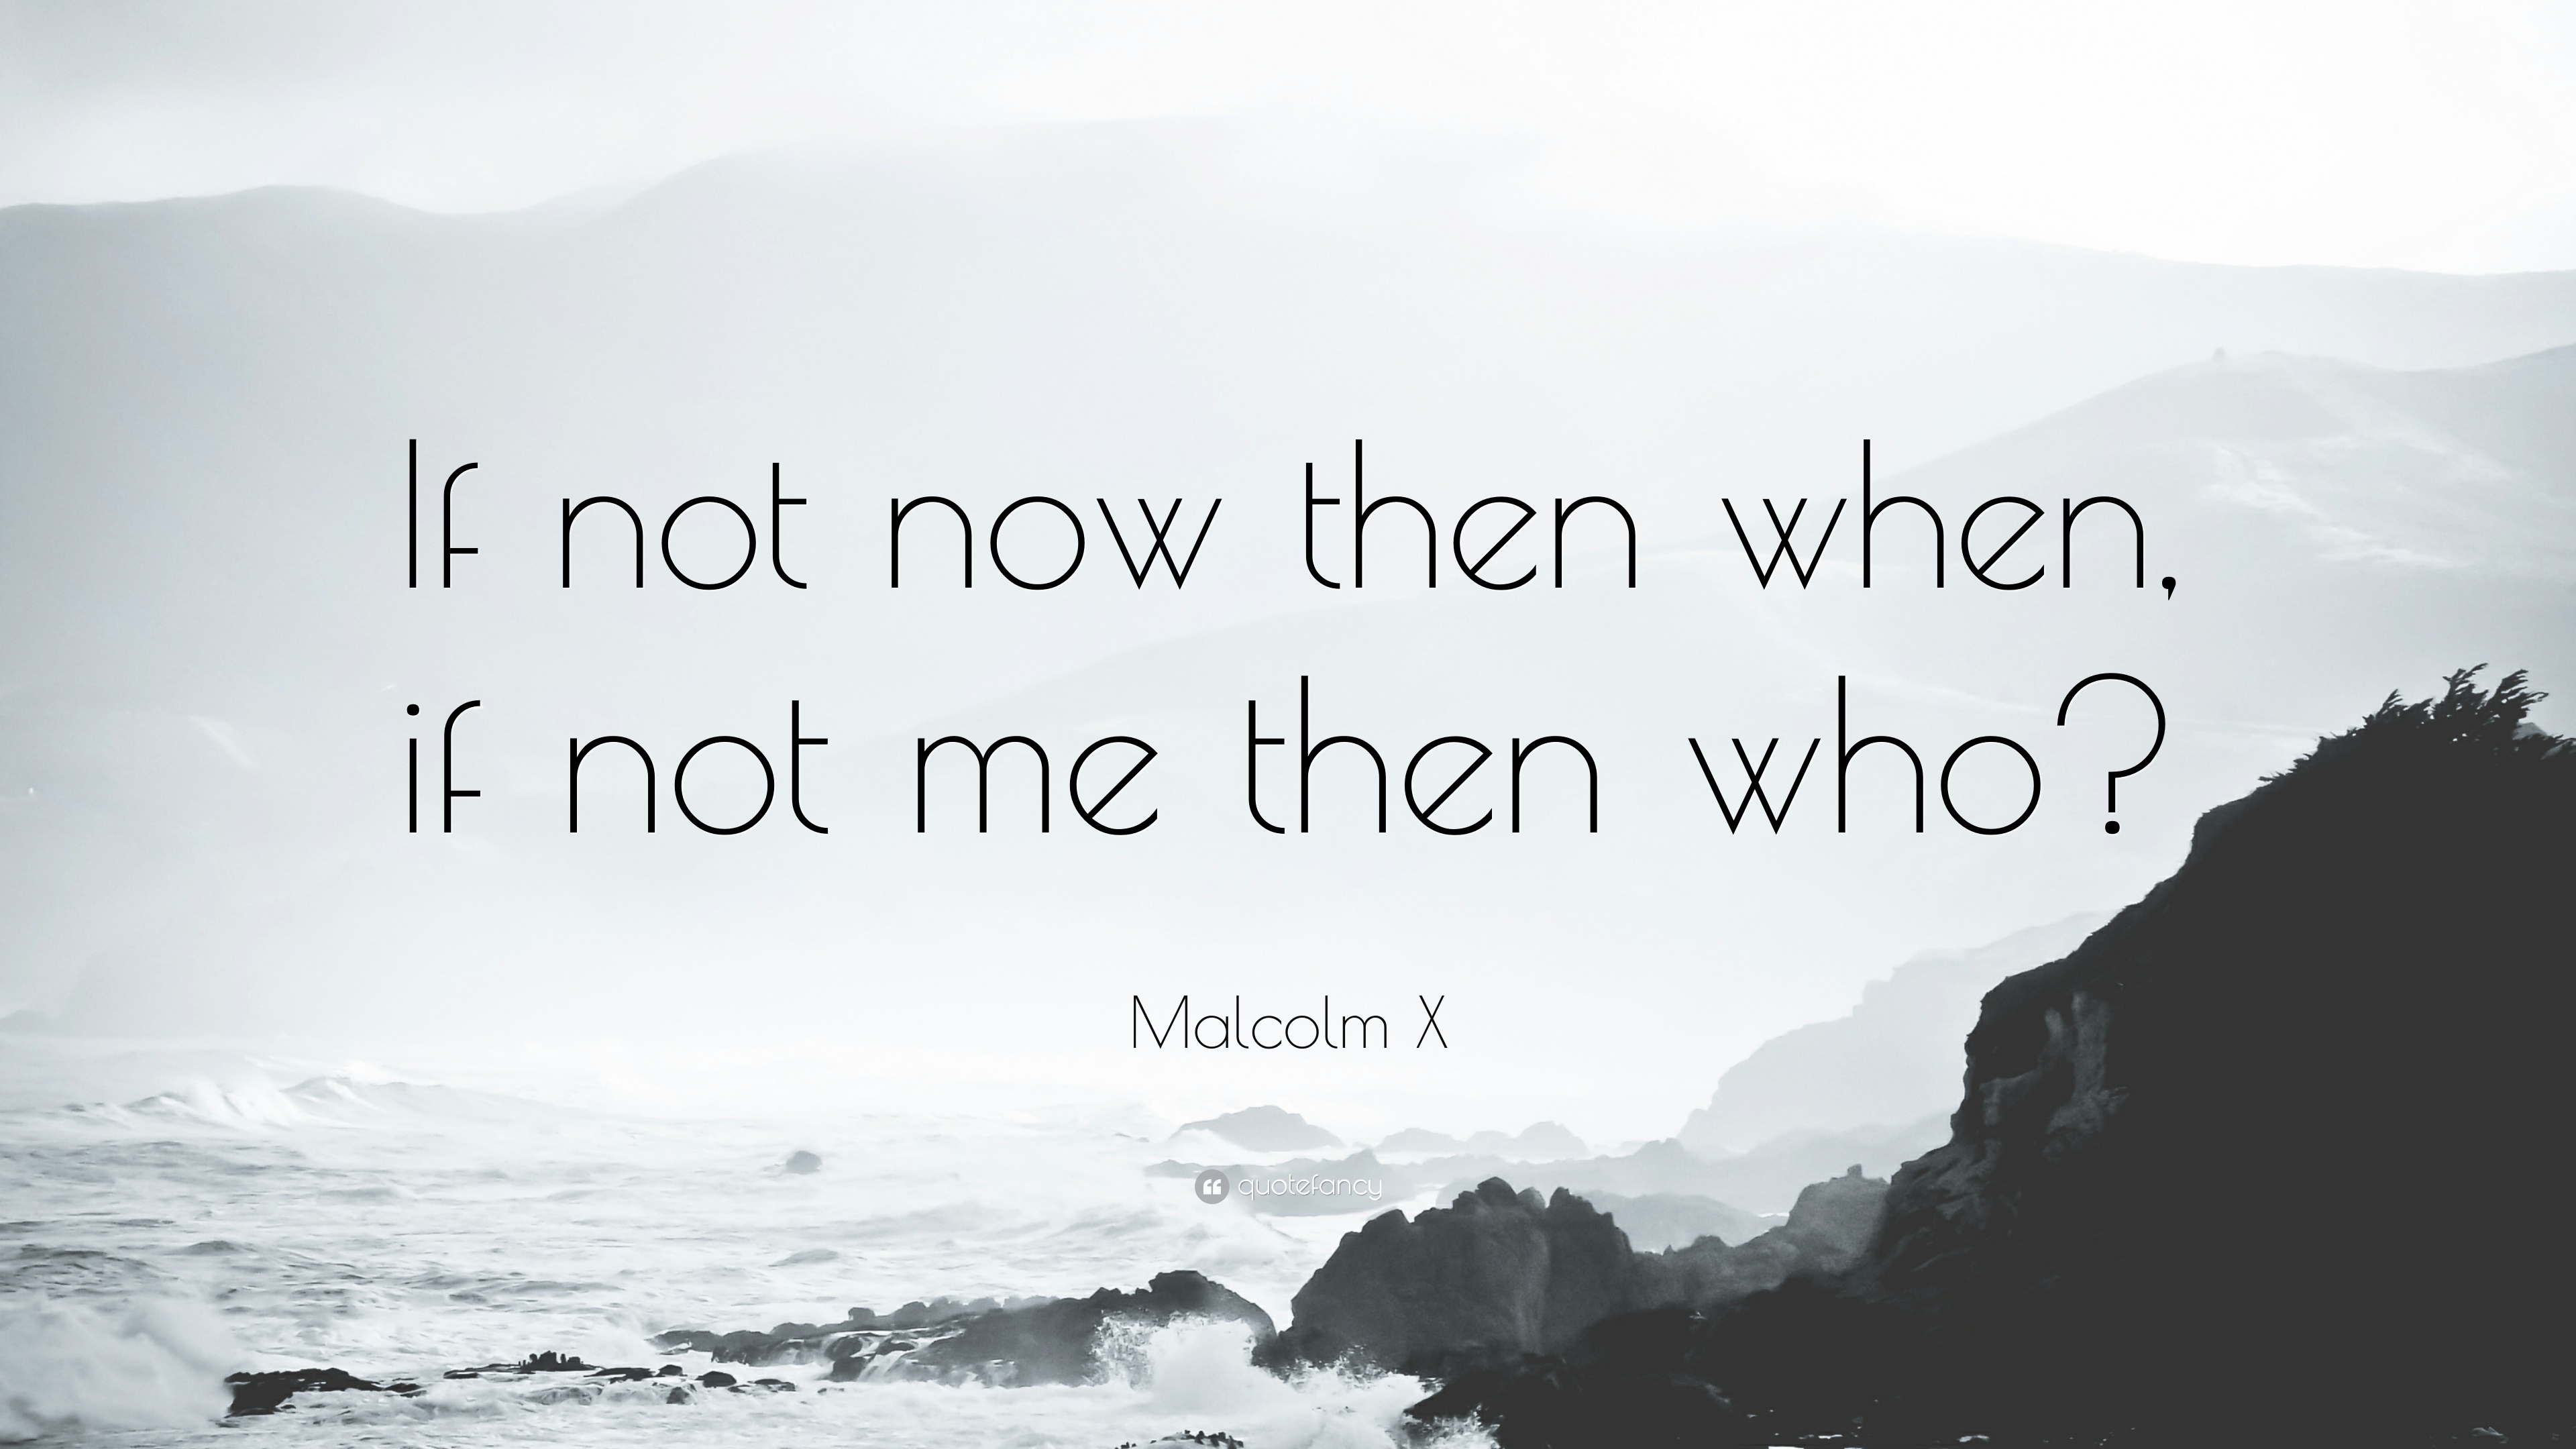 Malcolm X Quote: “If not now then when, if not me then who?”